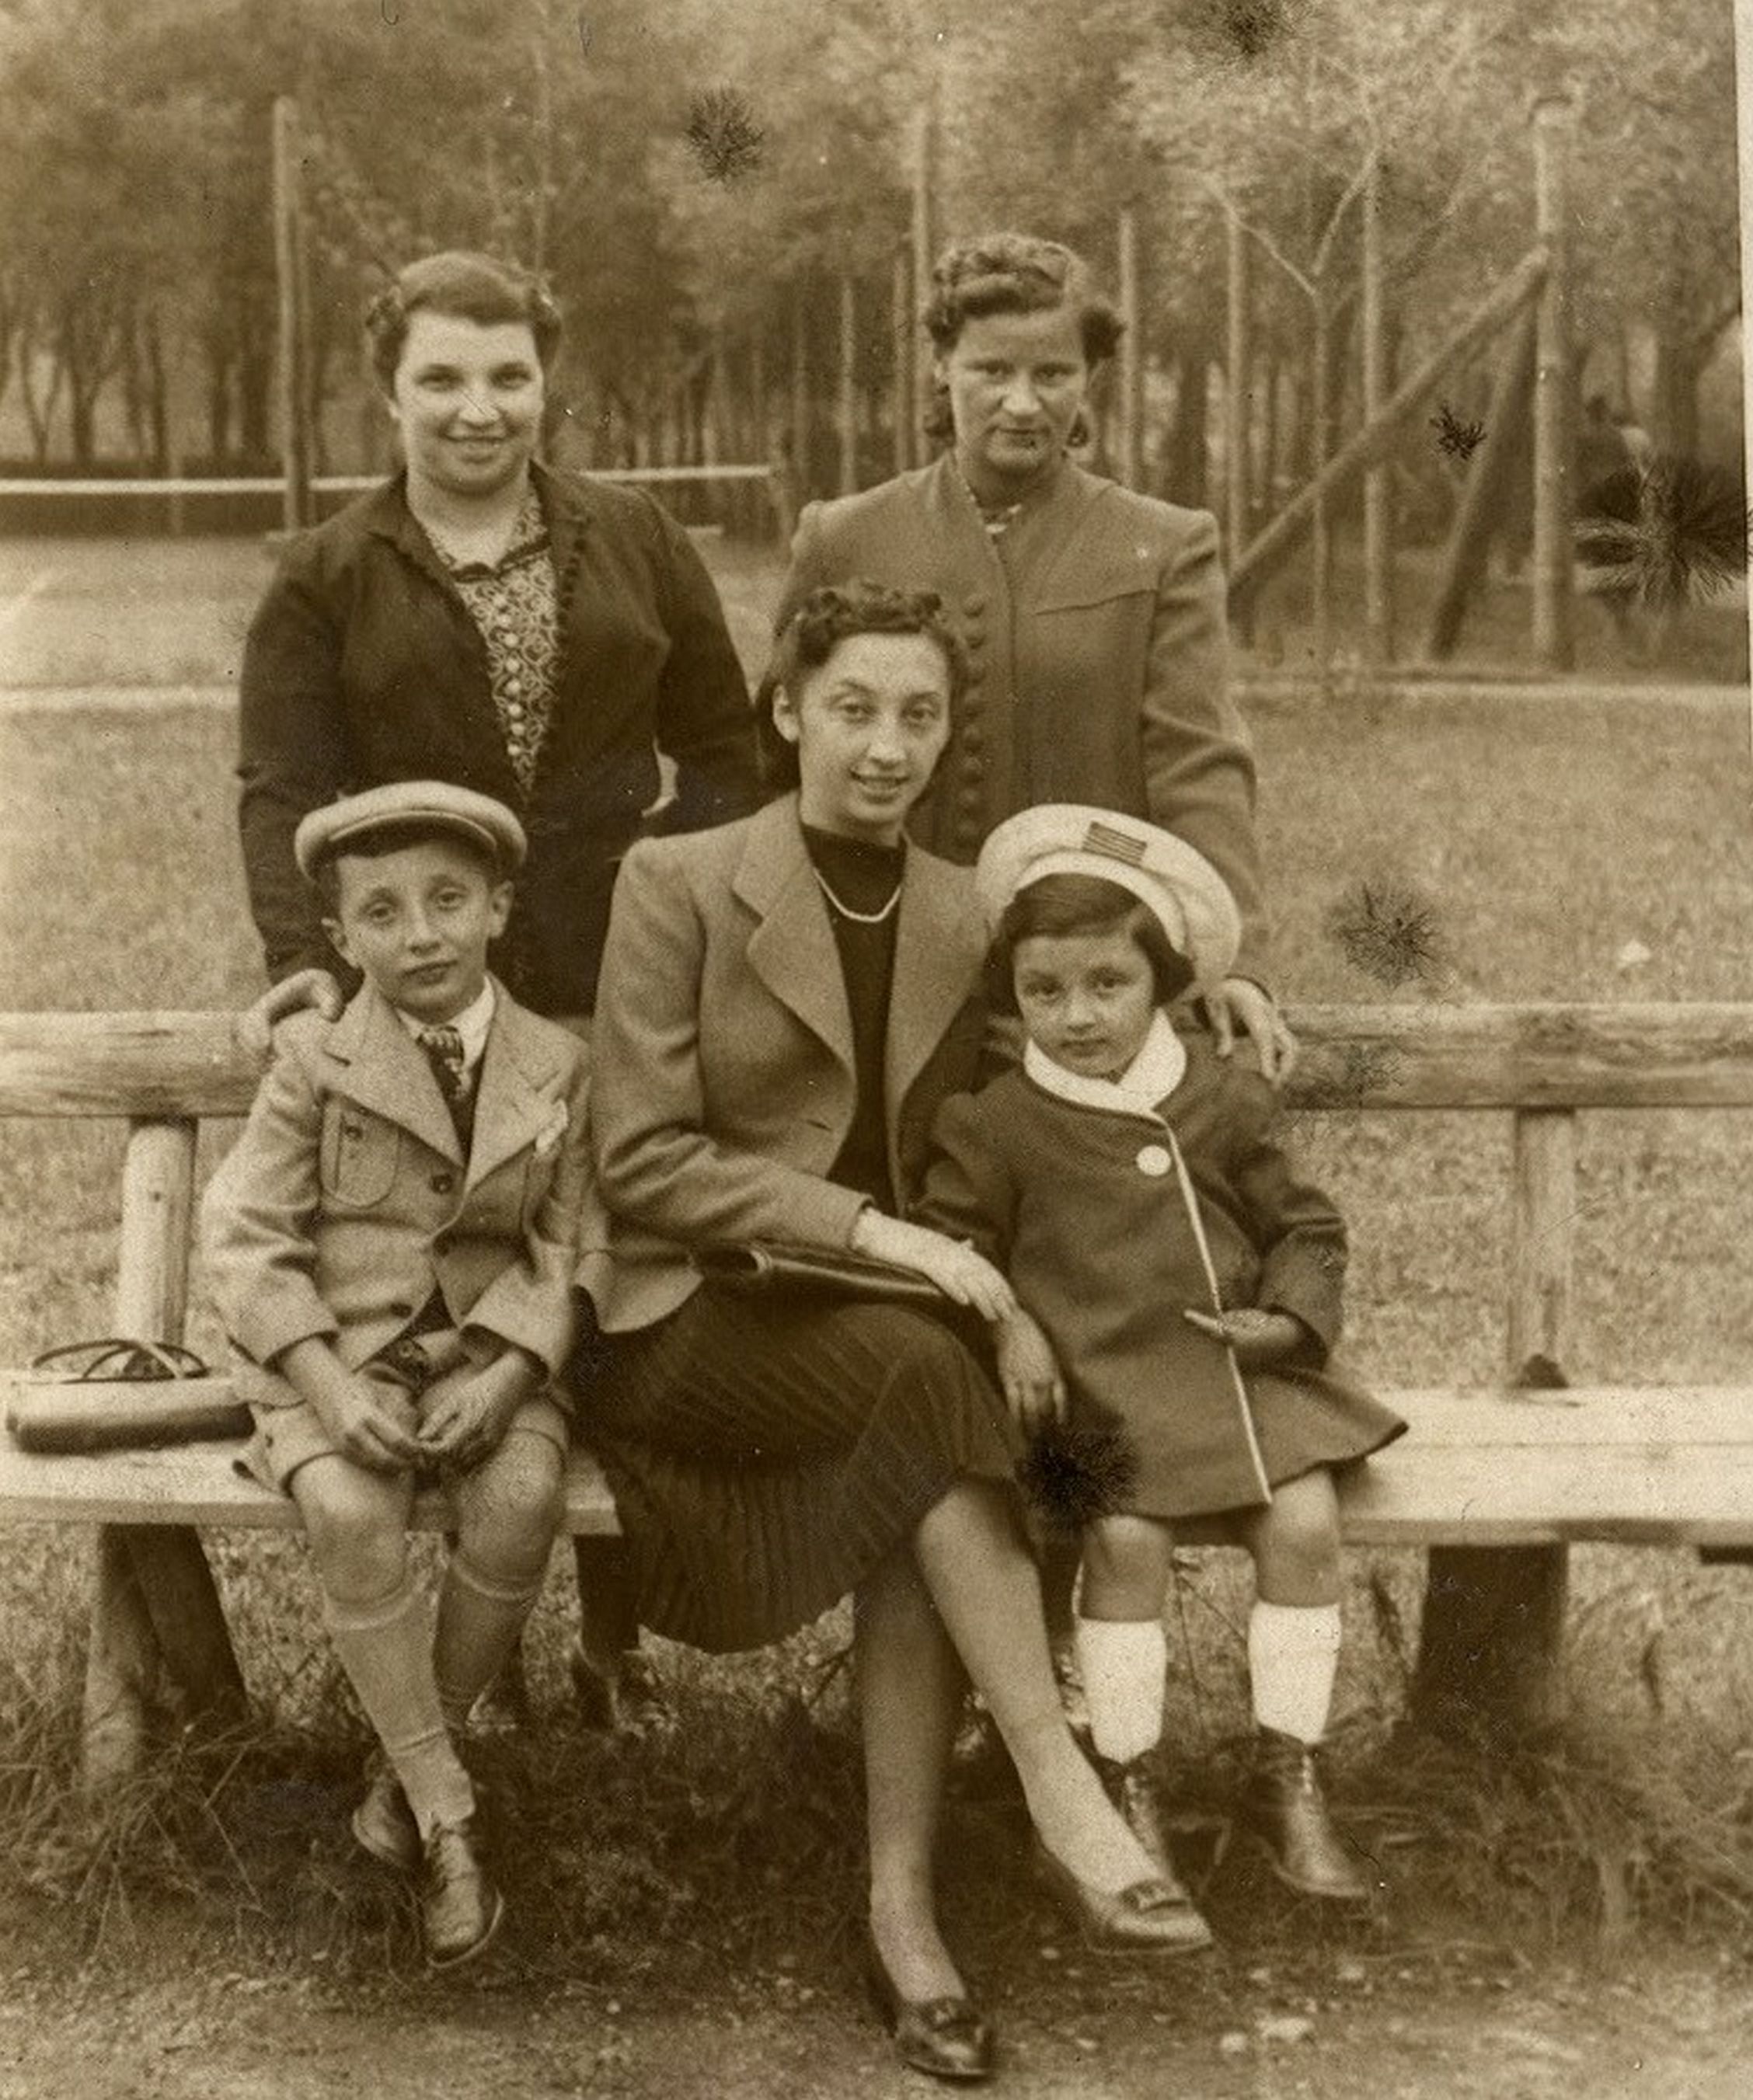 A woman and two children sitting on a bench. Behind them two women. In the background a meadow, a fence, trees.